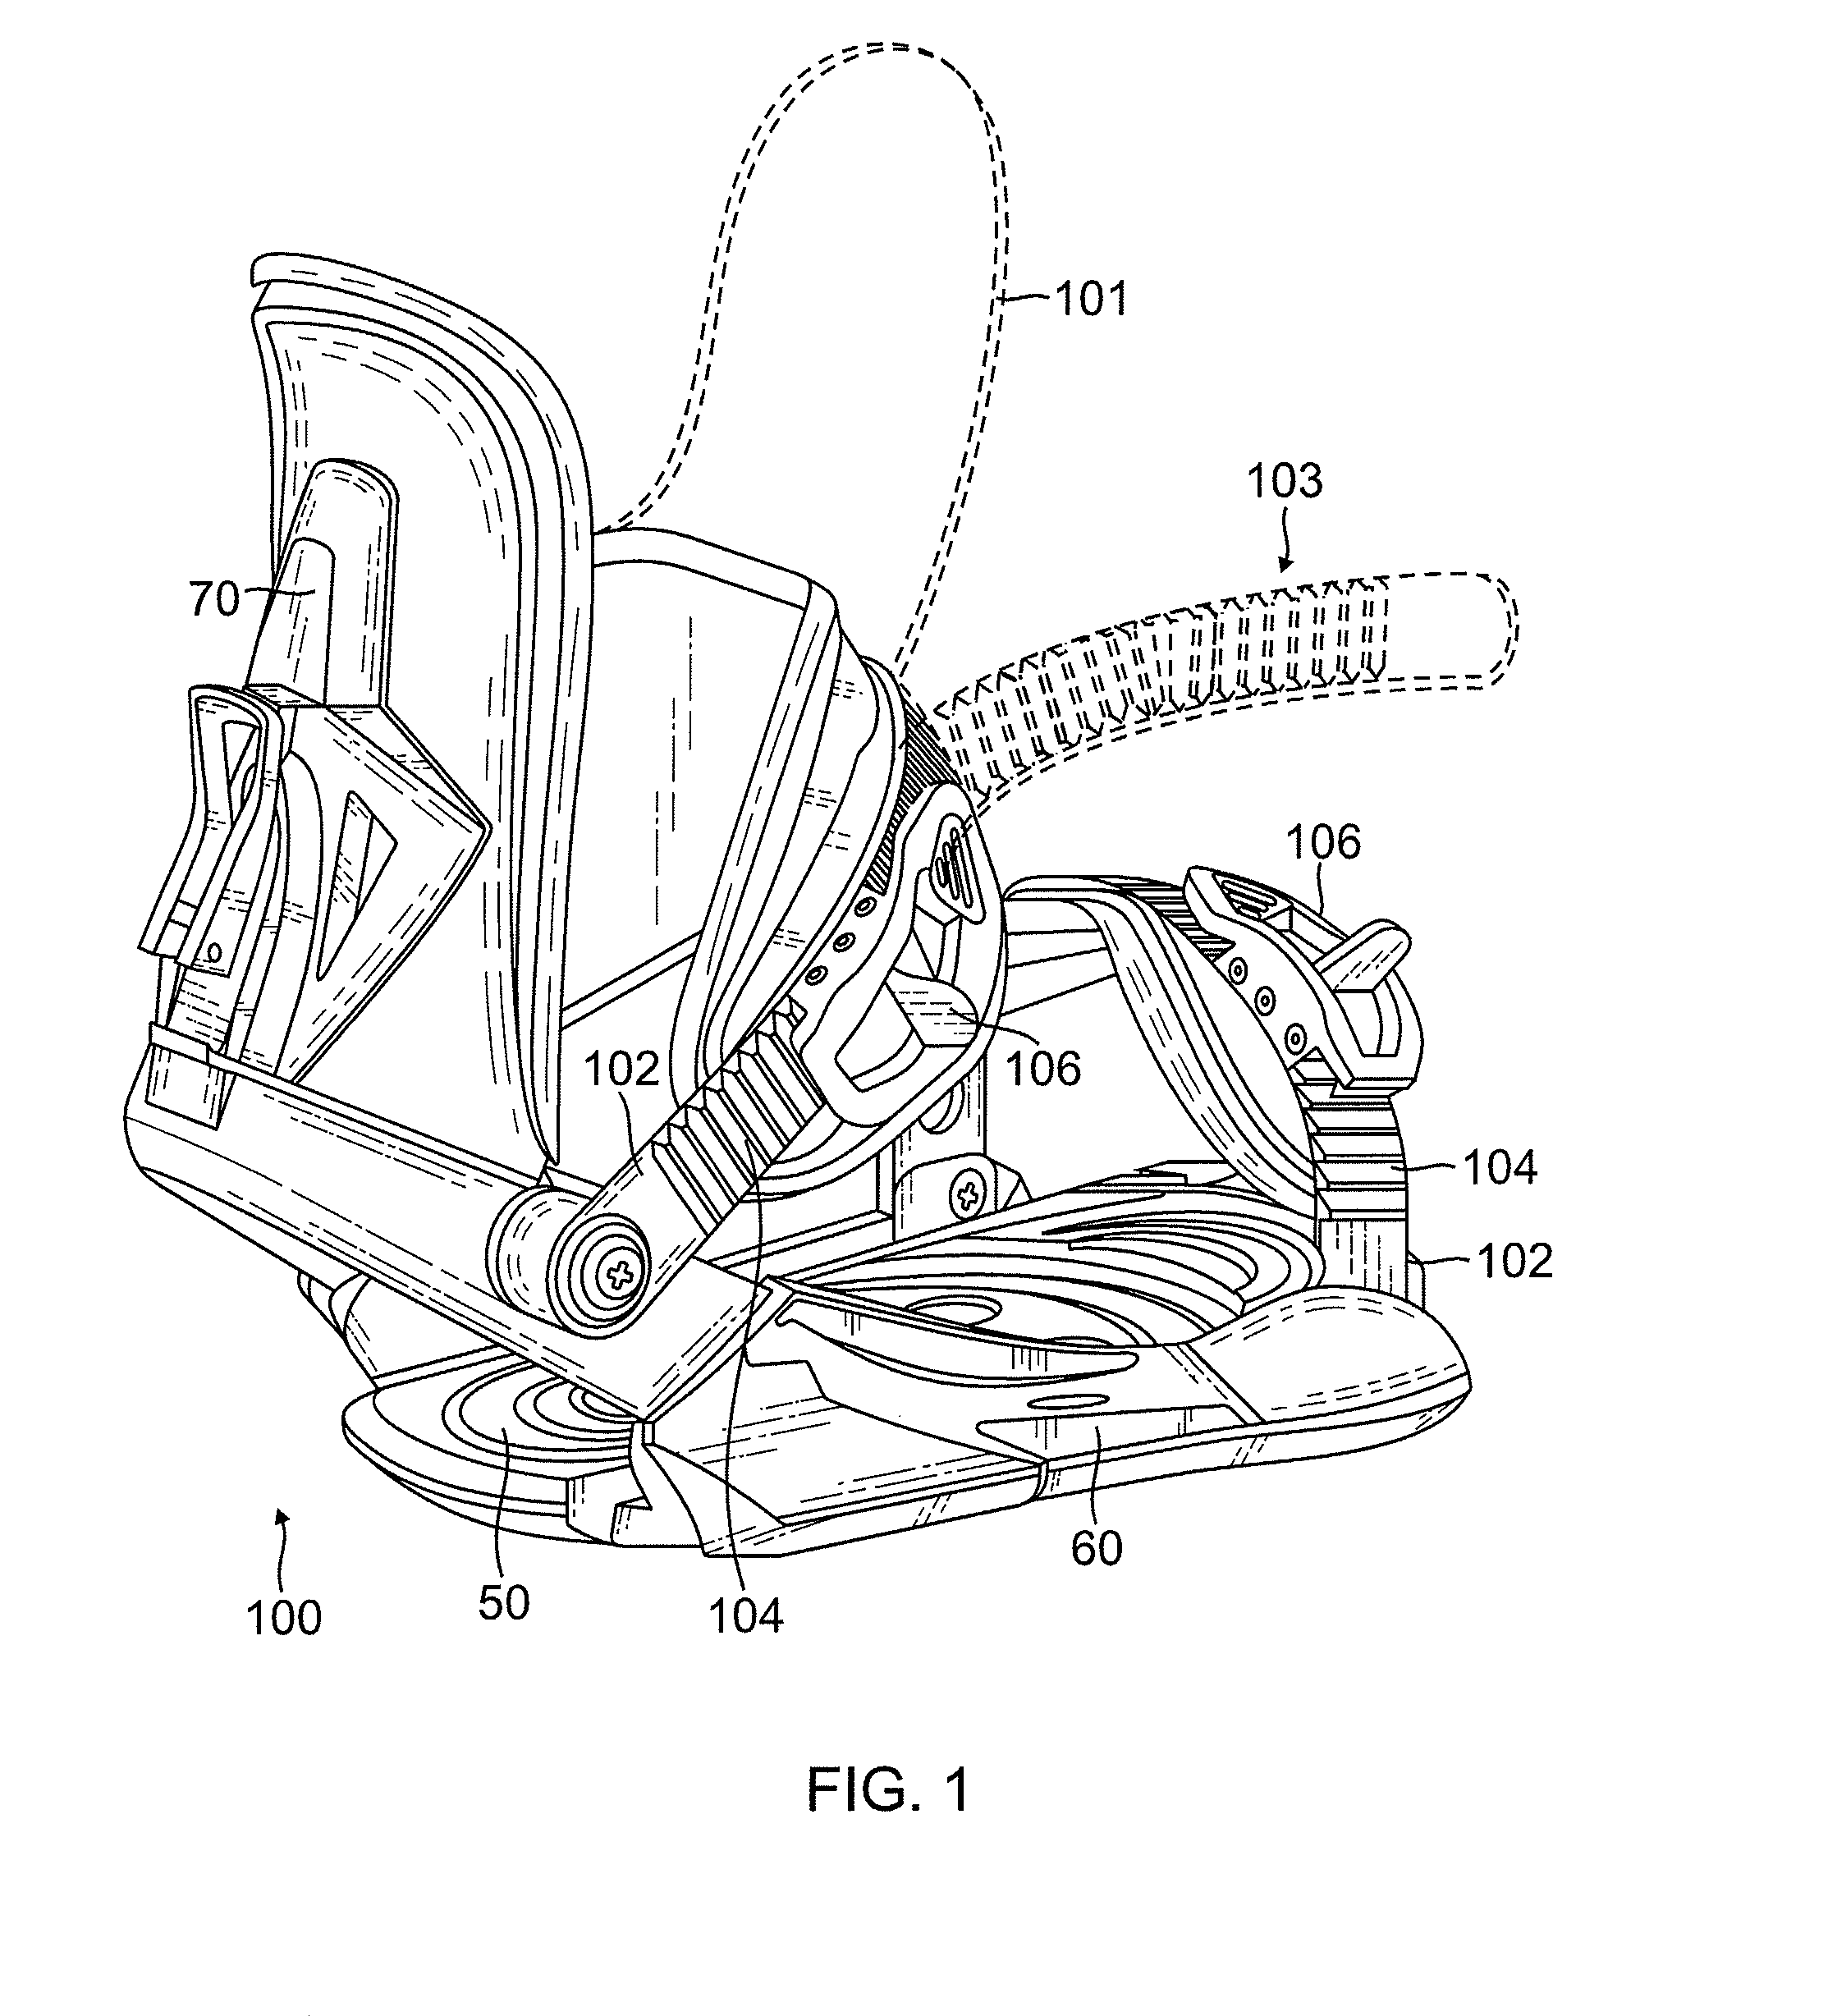 Reformable closure device strap